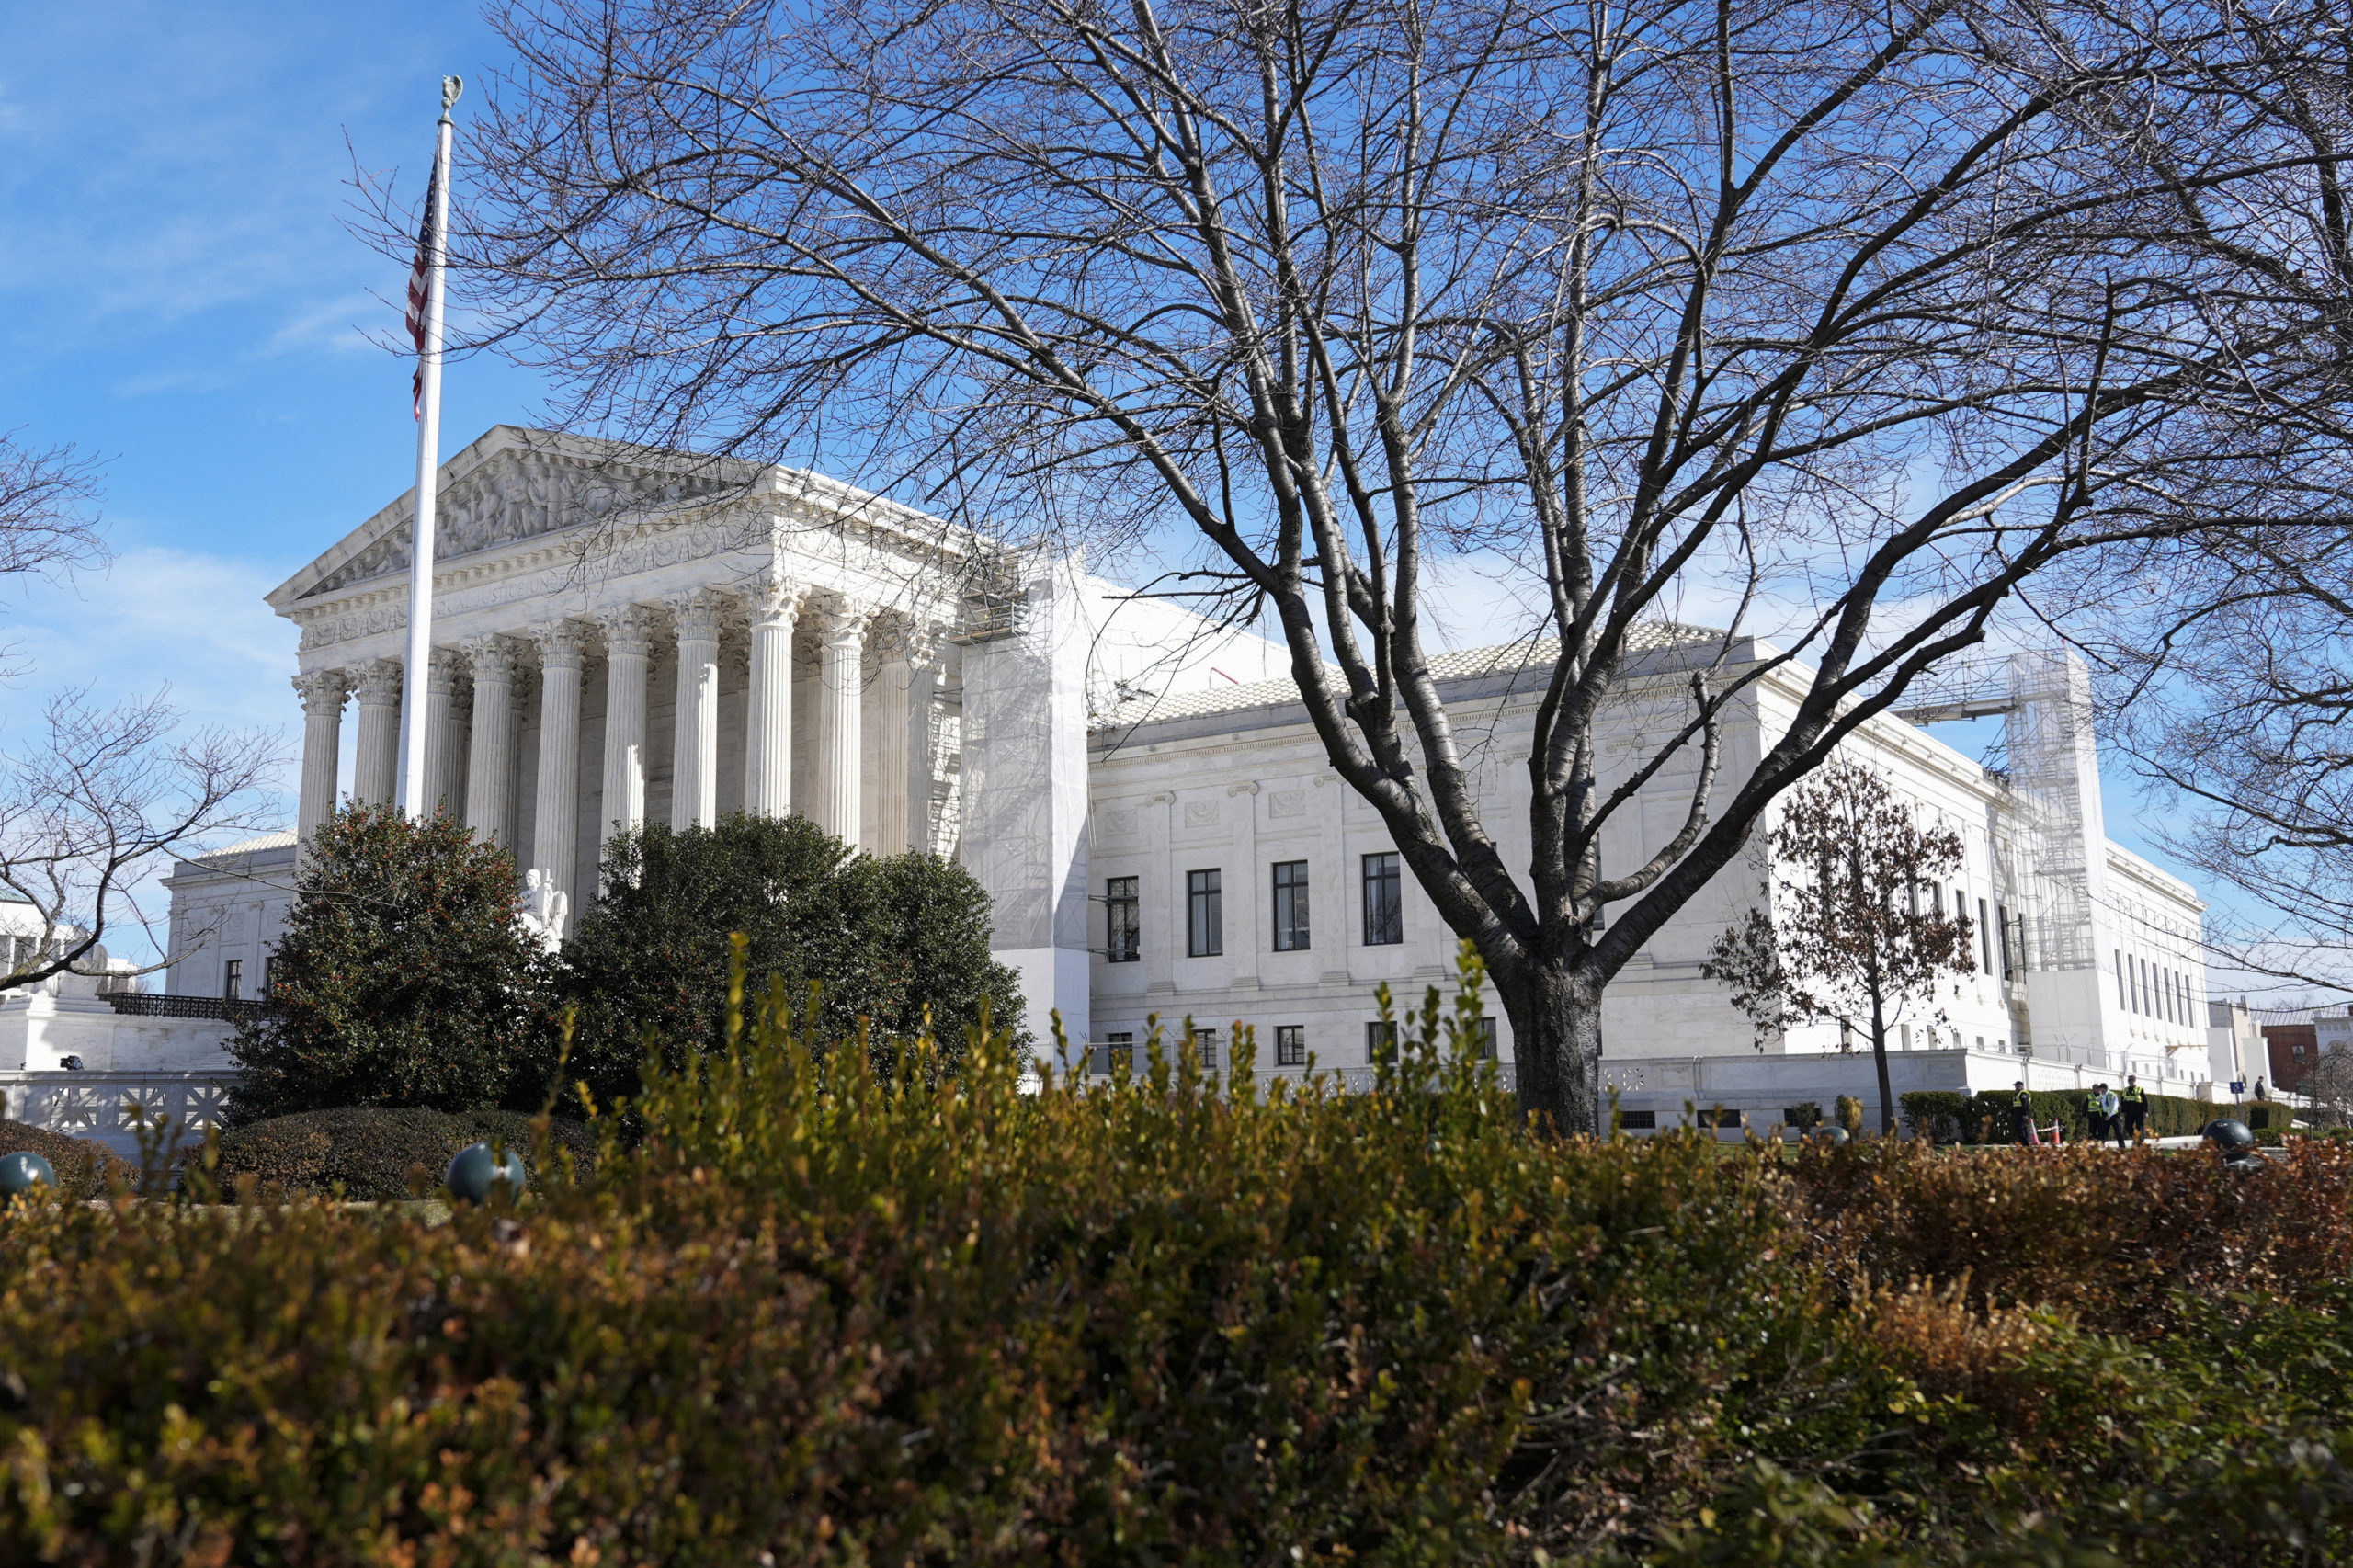 The U.S. Supreme Court is pictured on Feb. 8 in Washington, D.C. The U.S. Supreme Court has heard a historic case that could decide whether Donald Trump is ineligible for the 2024 ballot under Section 3 of the 14th Amendment.